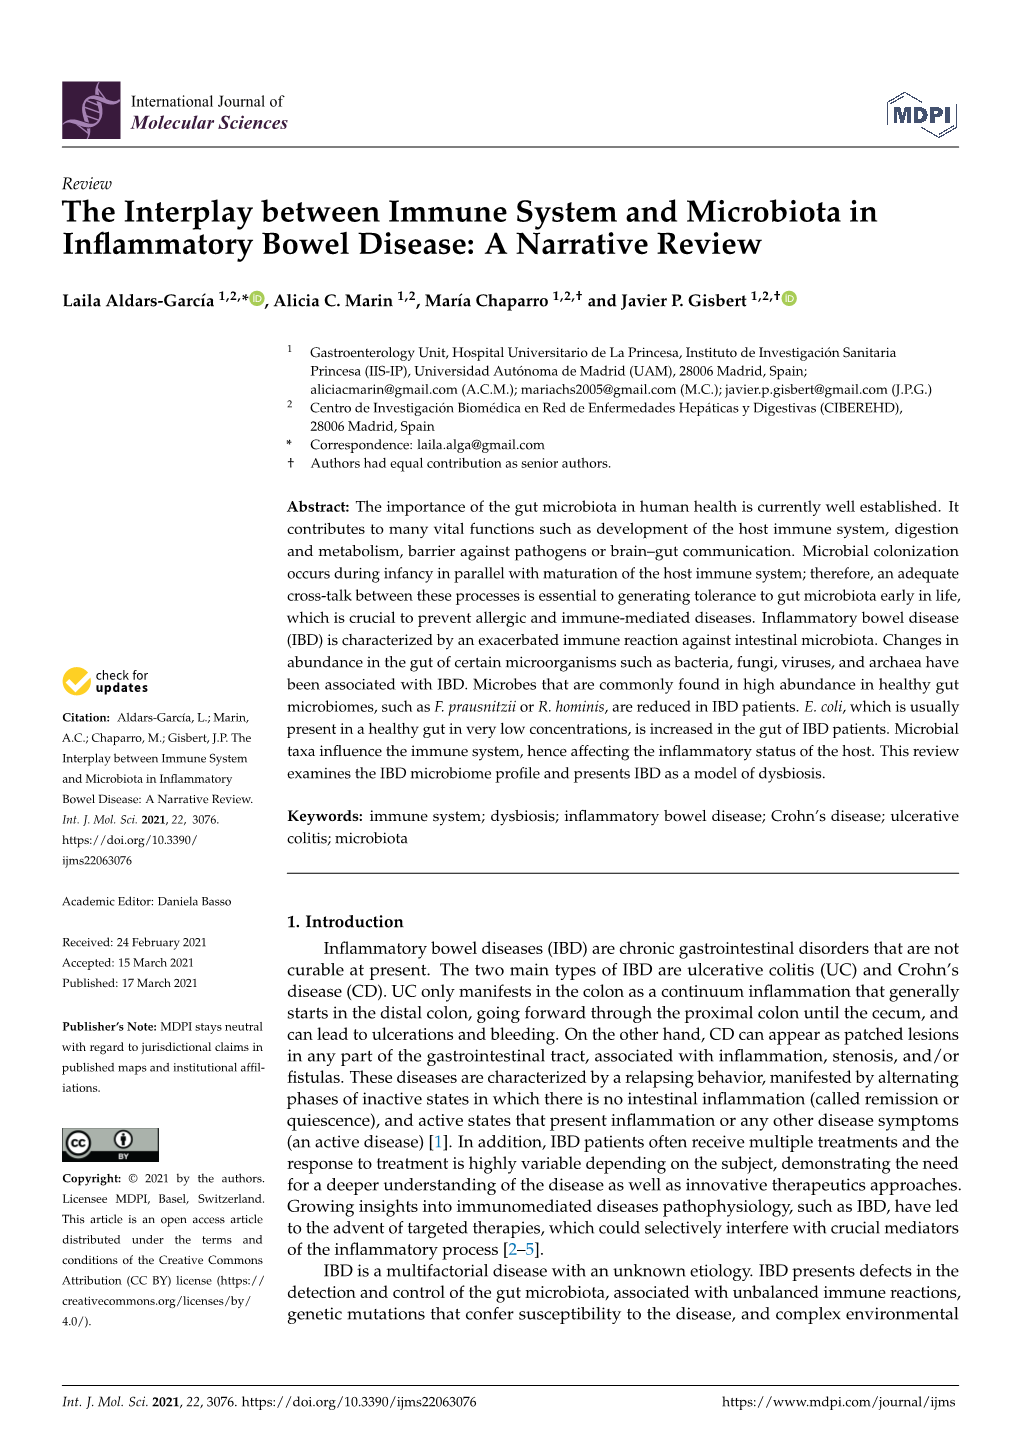 The Interplay Between Immune System and Microbiota in Inﬂammatory Bowel Disease: a Narrative Review